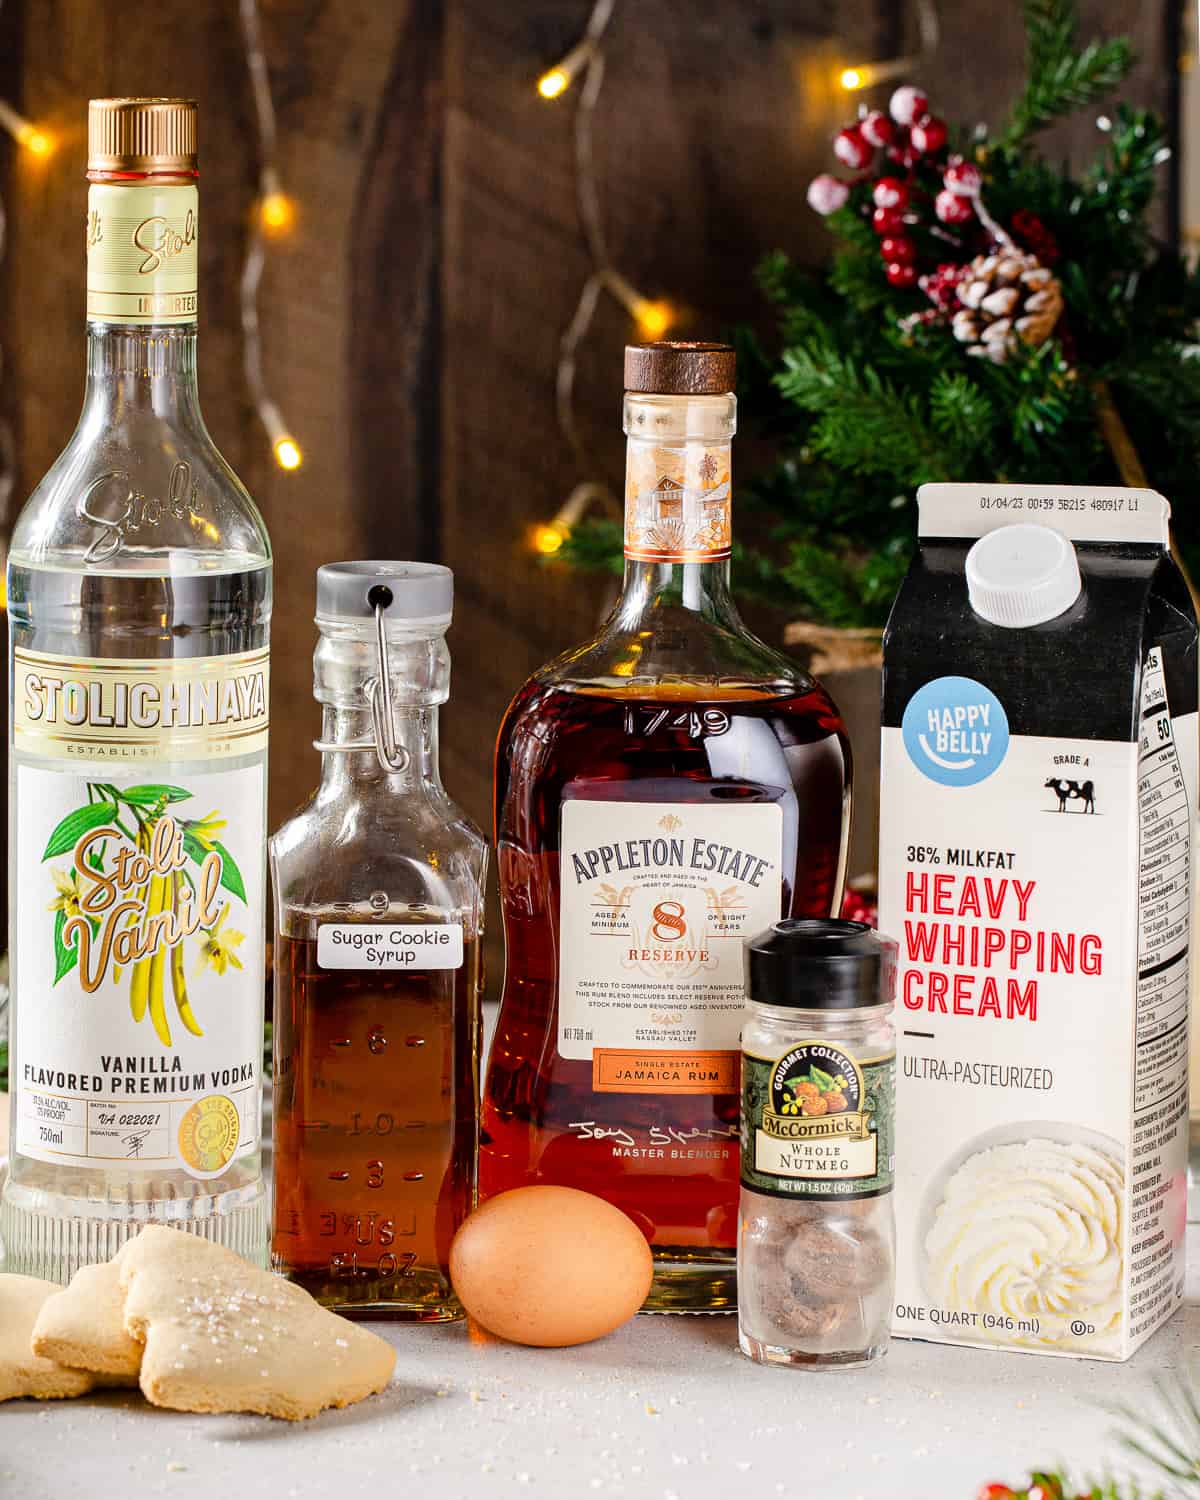 Ingredients to make Sugar Cookie Eggnog together on a countertop.